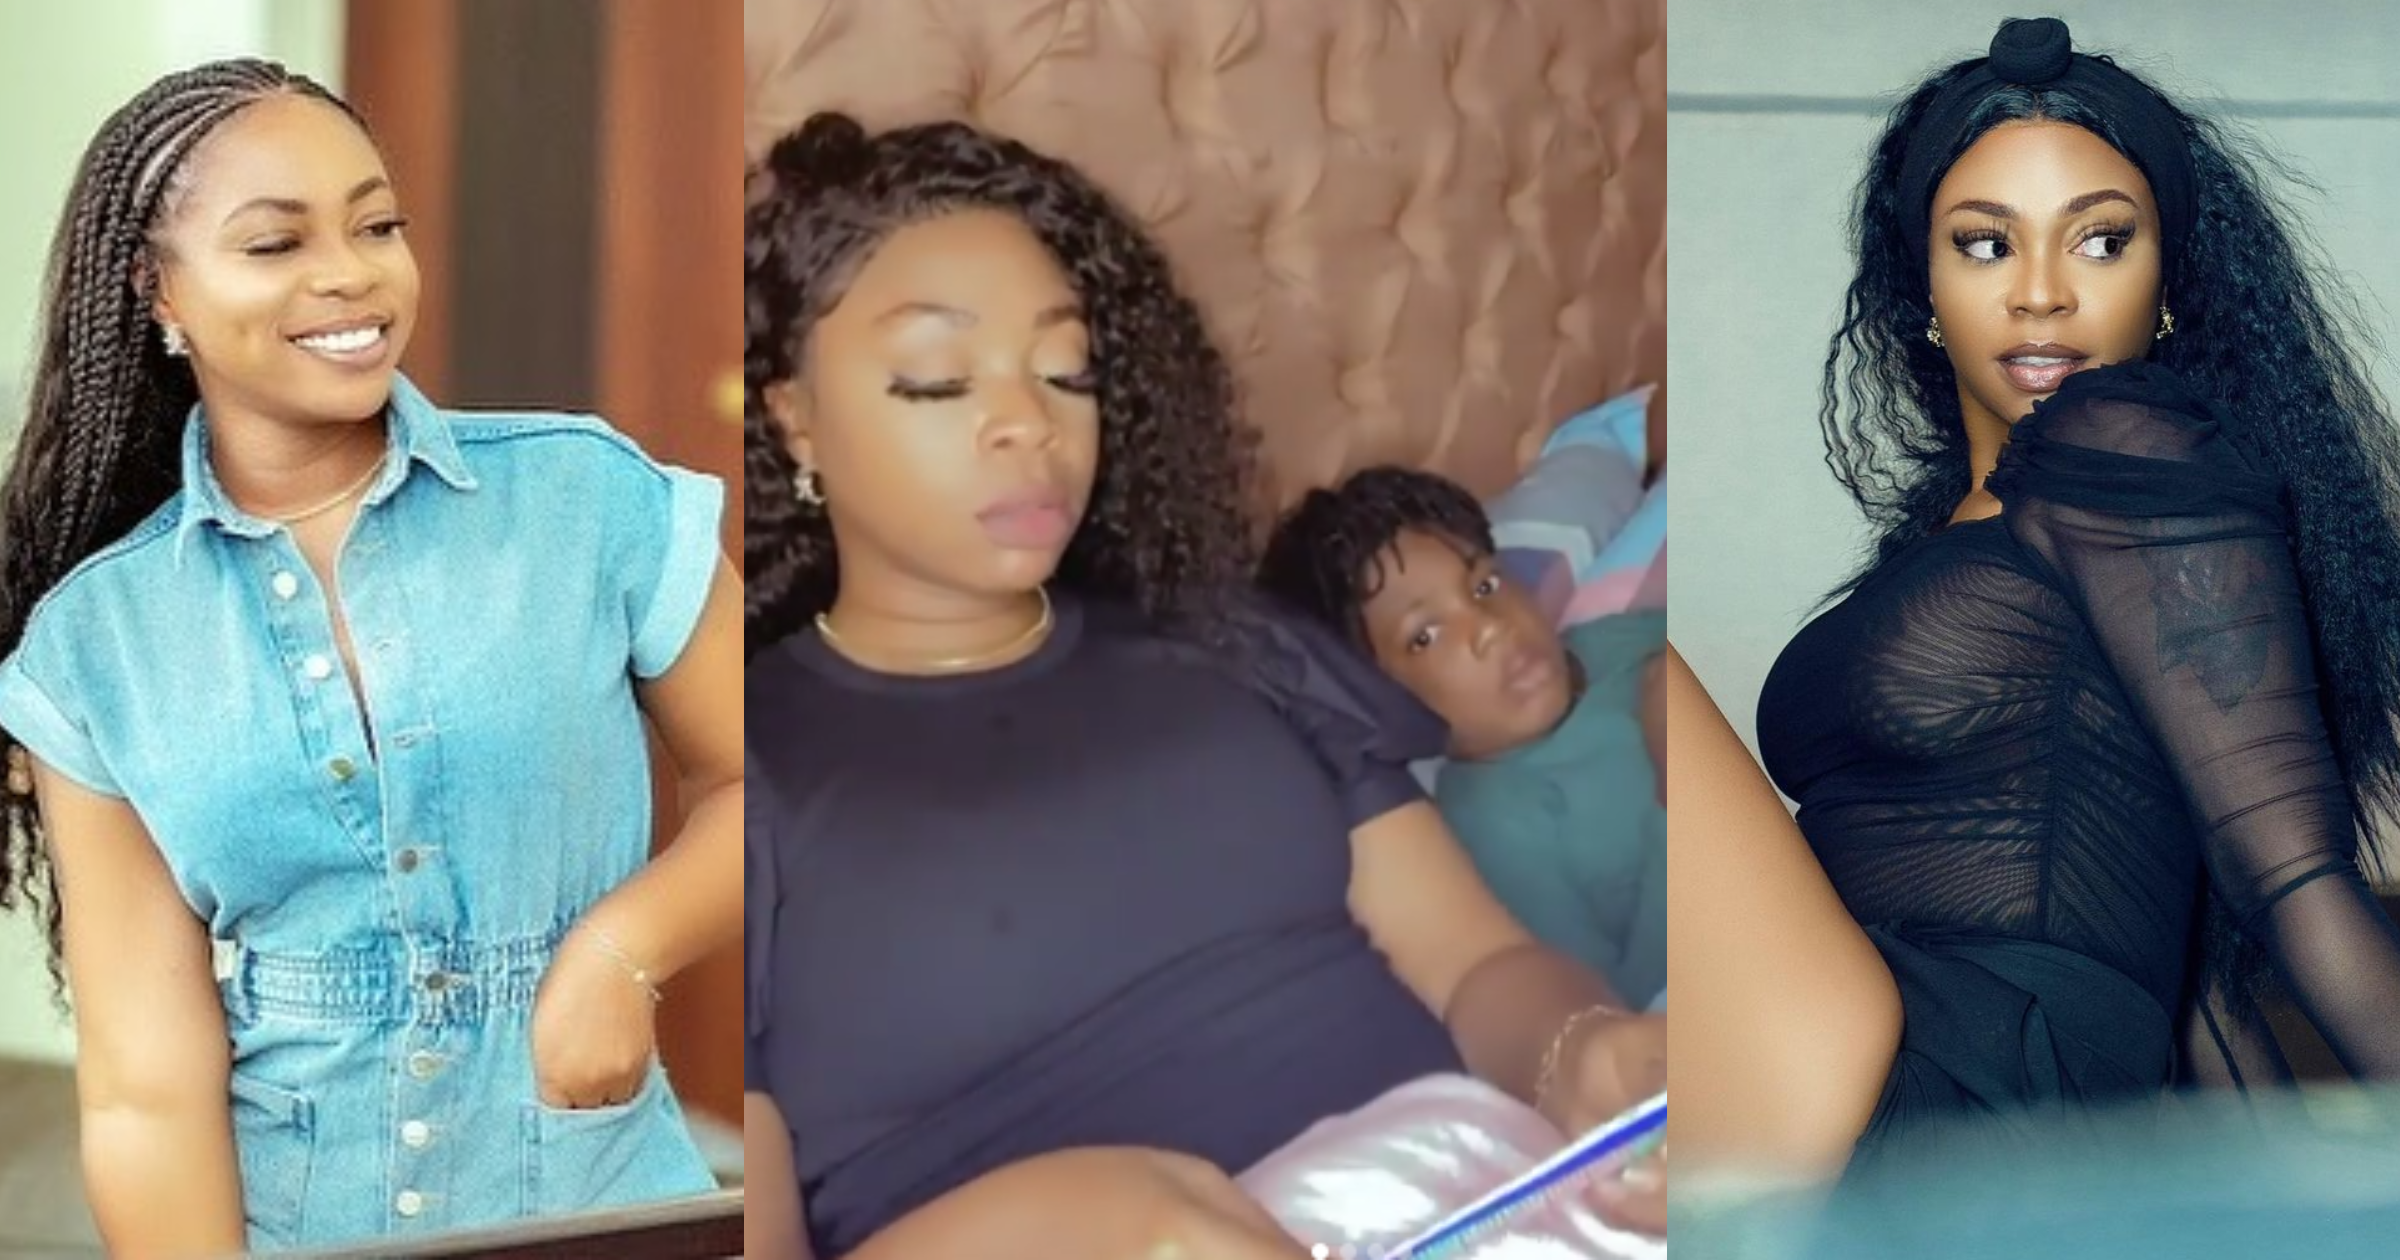 Please leave him - Fans beg as Michy rebukes Shatta Wale's son for 'stealing' candy, he blames aunty in video